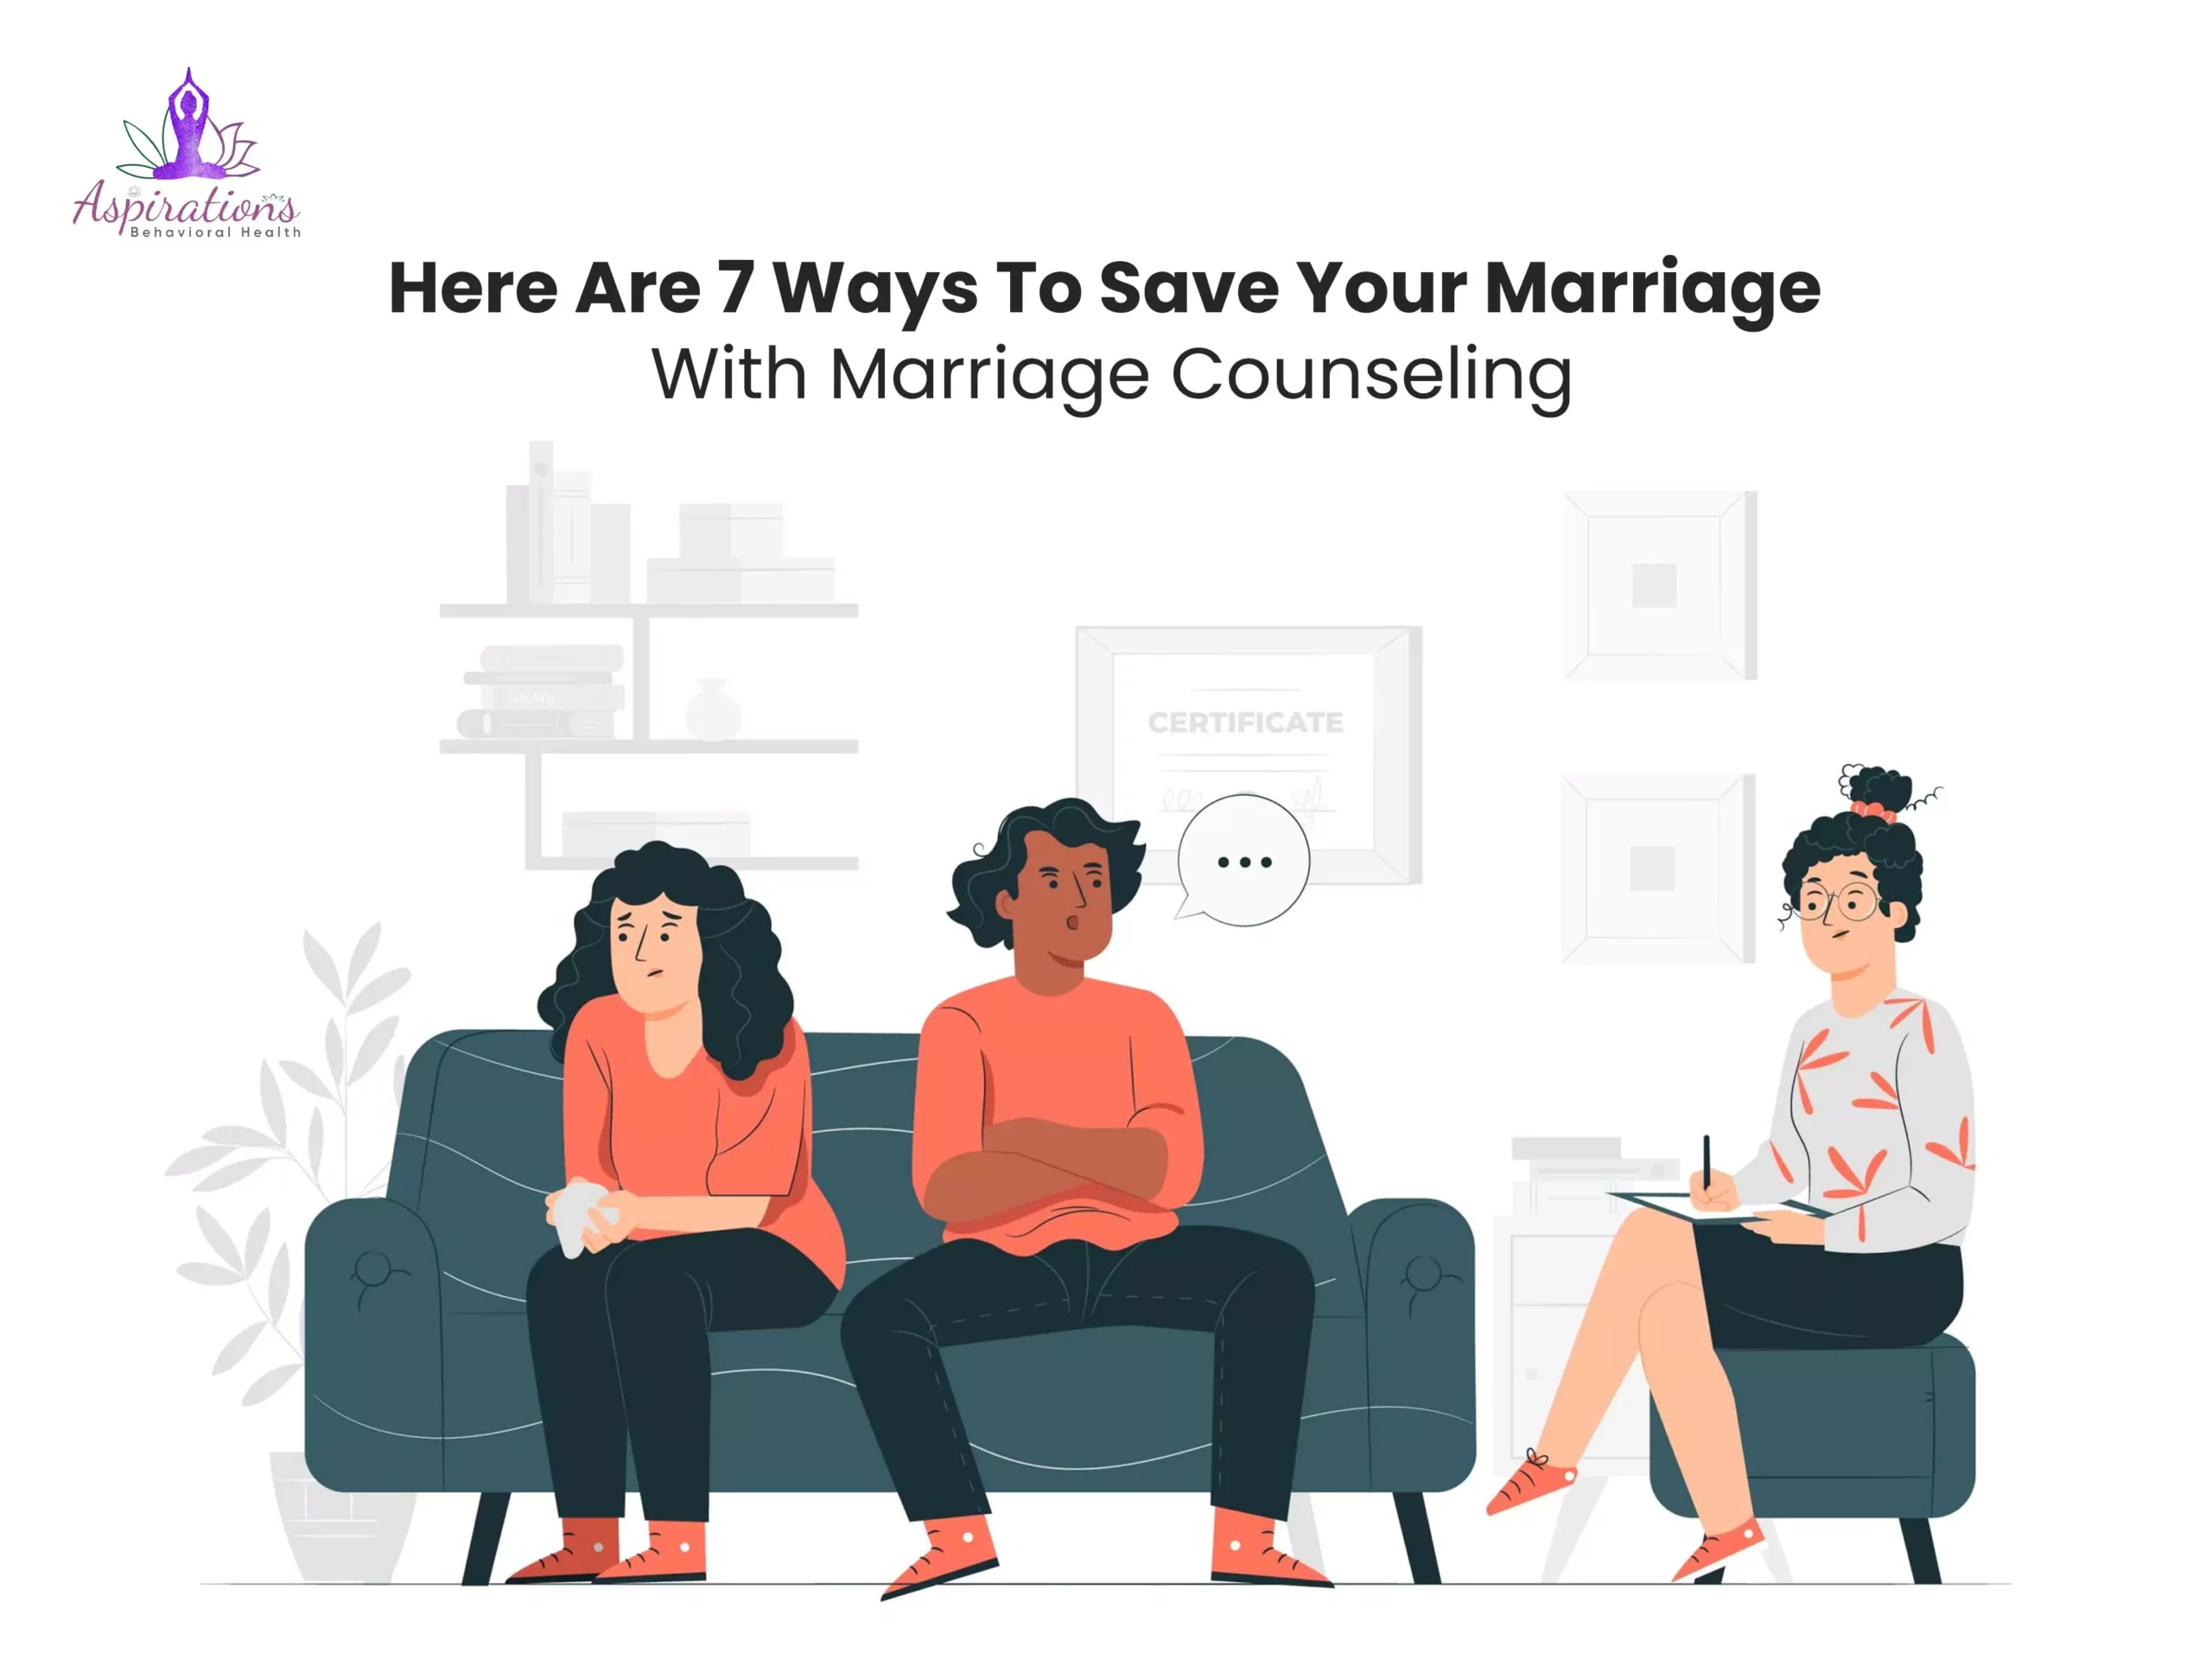 Here Are 7 Ways To Save Your Marriage With Marriage Counseling